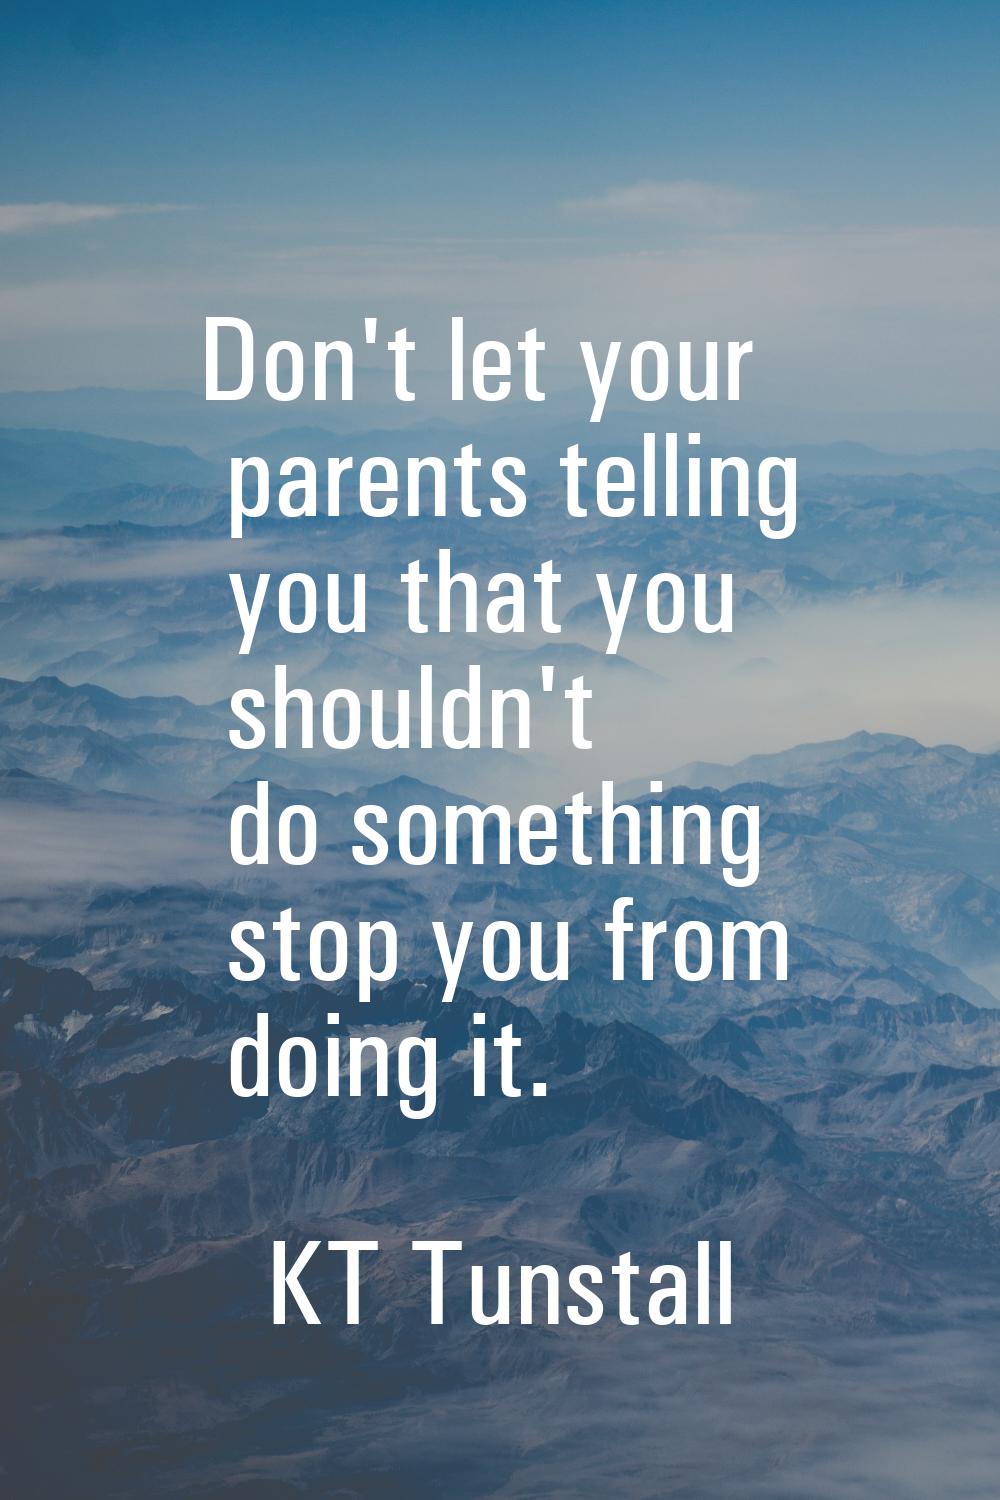 Don't let your parents telling you that you shouldn't do something stop you from doing it.